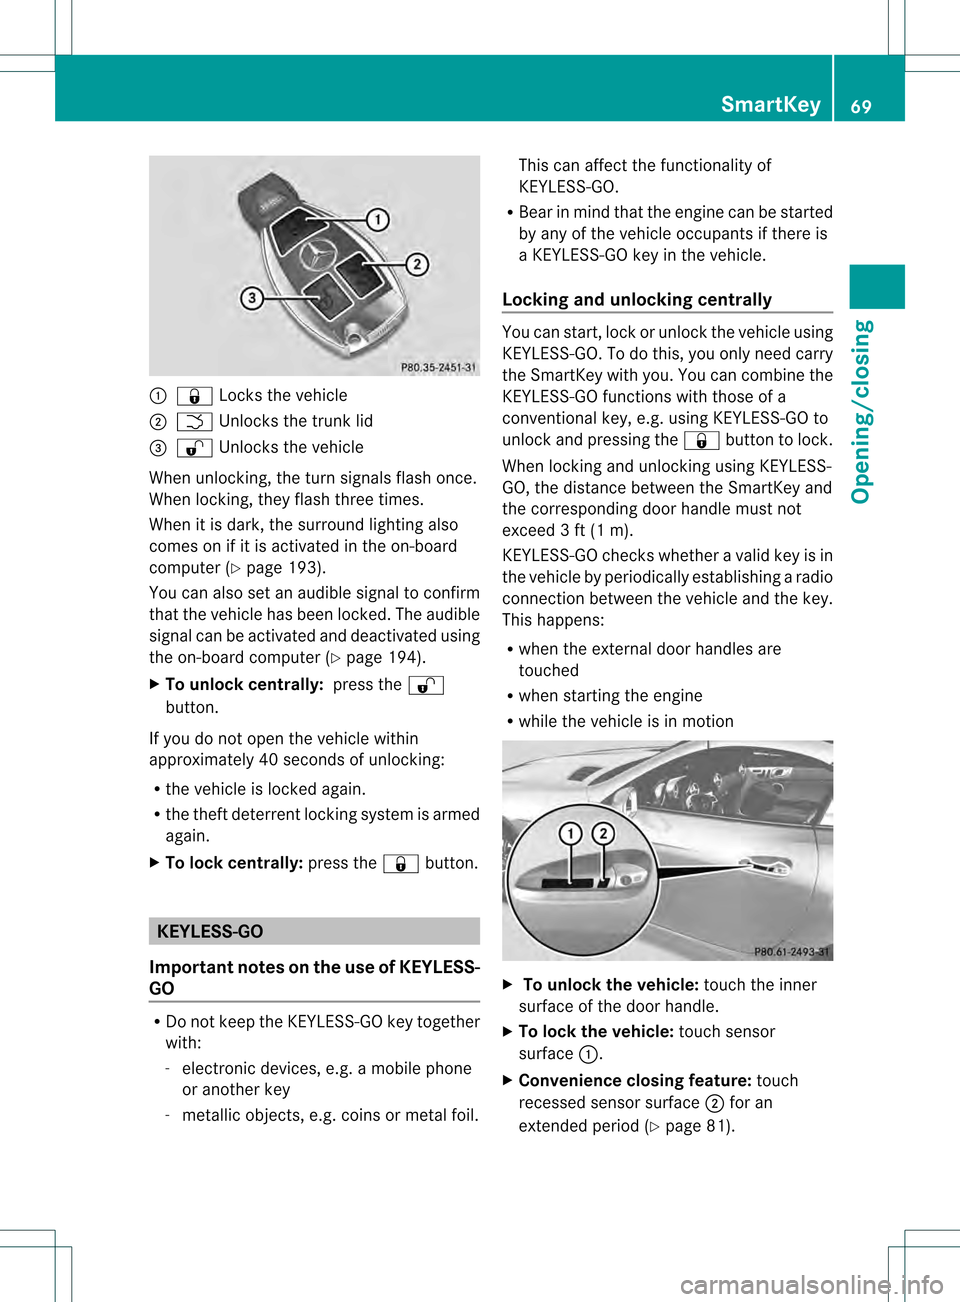 MERCEDES-BENZ SLK350 2012 R172 Owners Manual 0002
000F Locks the vehicle
0003 0006 Unlocks the trunk lid
0023 0010 Unlocks the vehicle
When unlocking, the turn signals flash once.
When locking, they flash three times.
When it is dark, the surrou